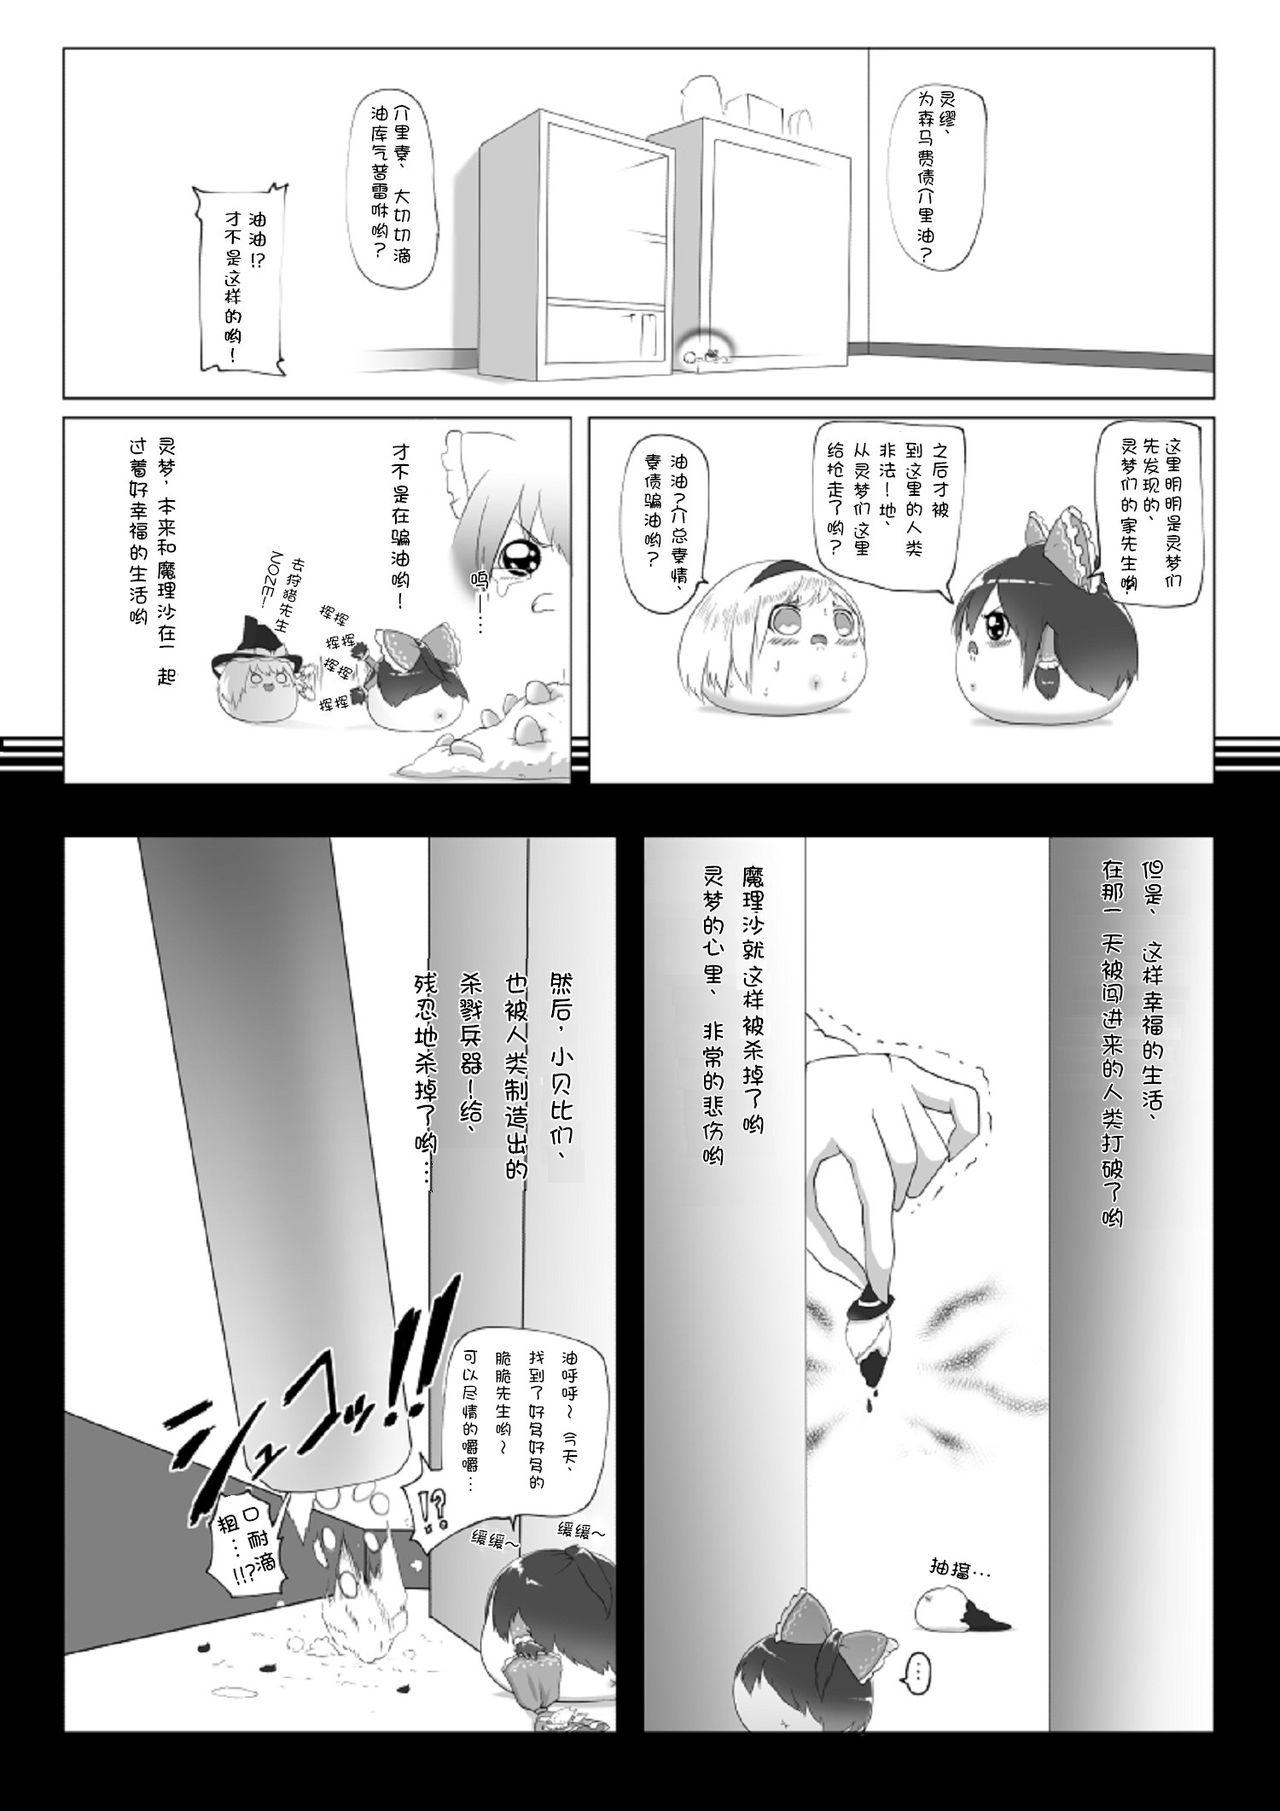 Relax ゆっくりがかってにはえてくるわけ（Chinese) - Touhou project Pau Grande - Page 5